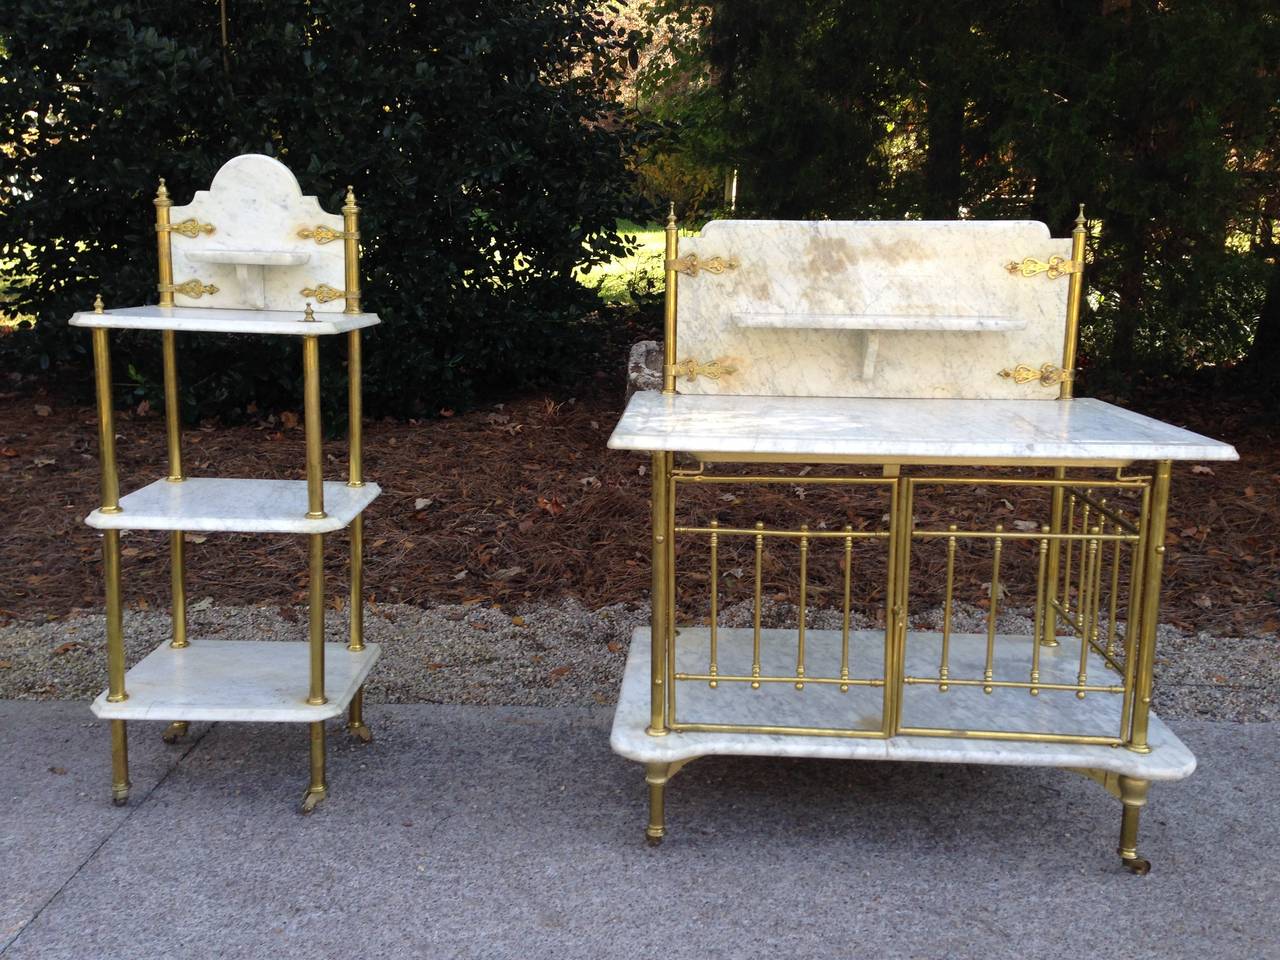 Fabulous pair of French marble and brass carts from Paris. The carts have decorative brass straps and brass casters. The large cart has a working gate below. Would be fabulous as a bar or in a kitchen. Lovely patina on the Carrara marble and aged